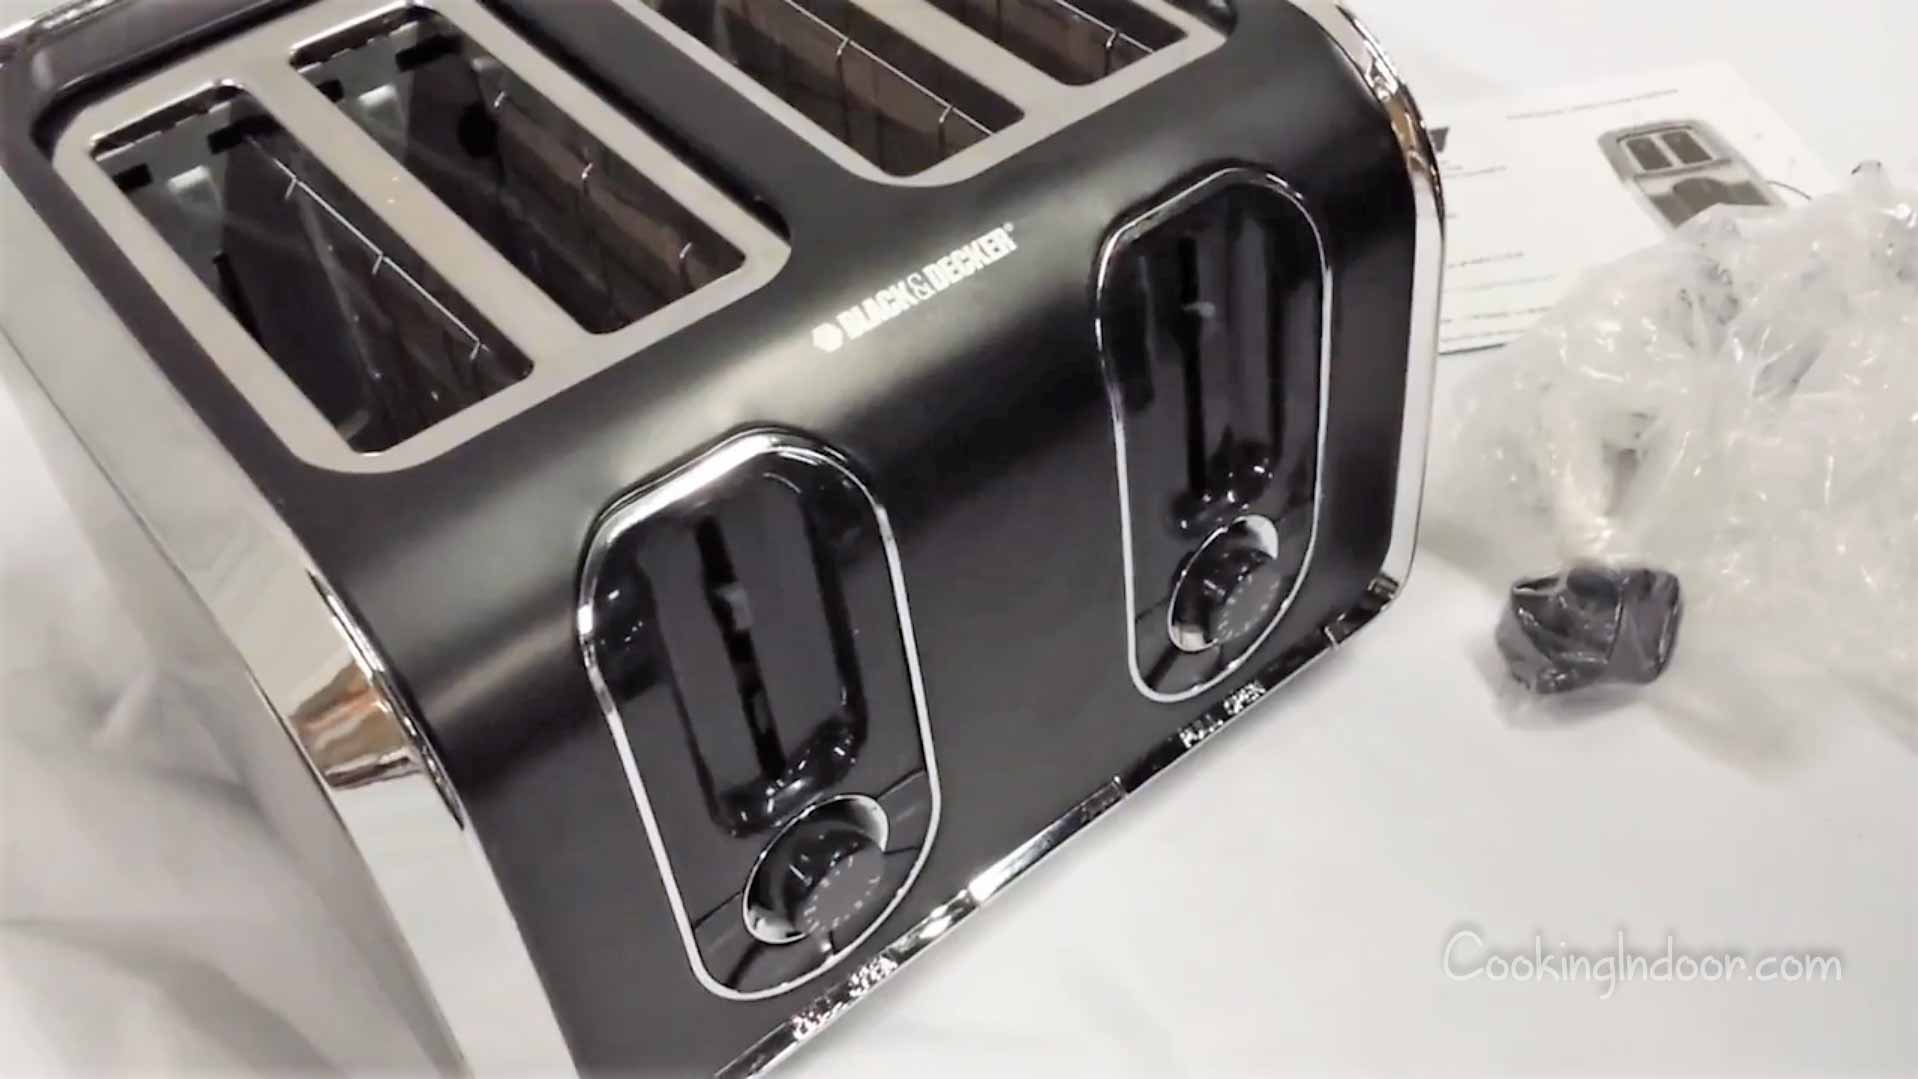 Best black and silver toaster